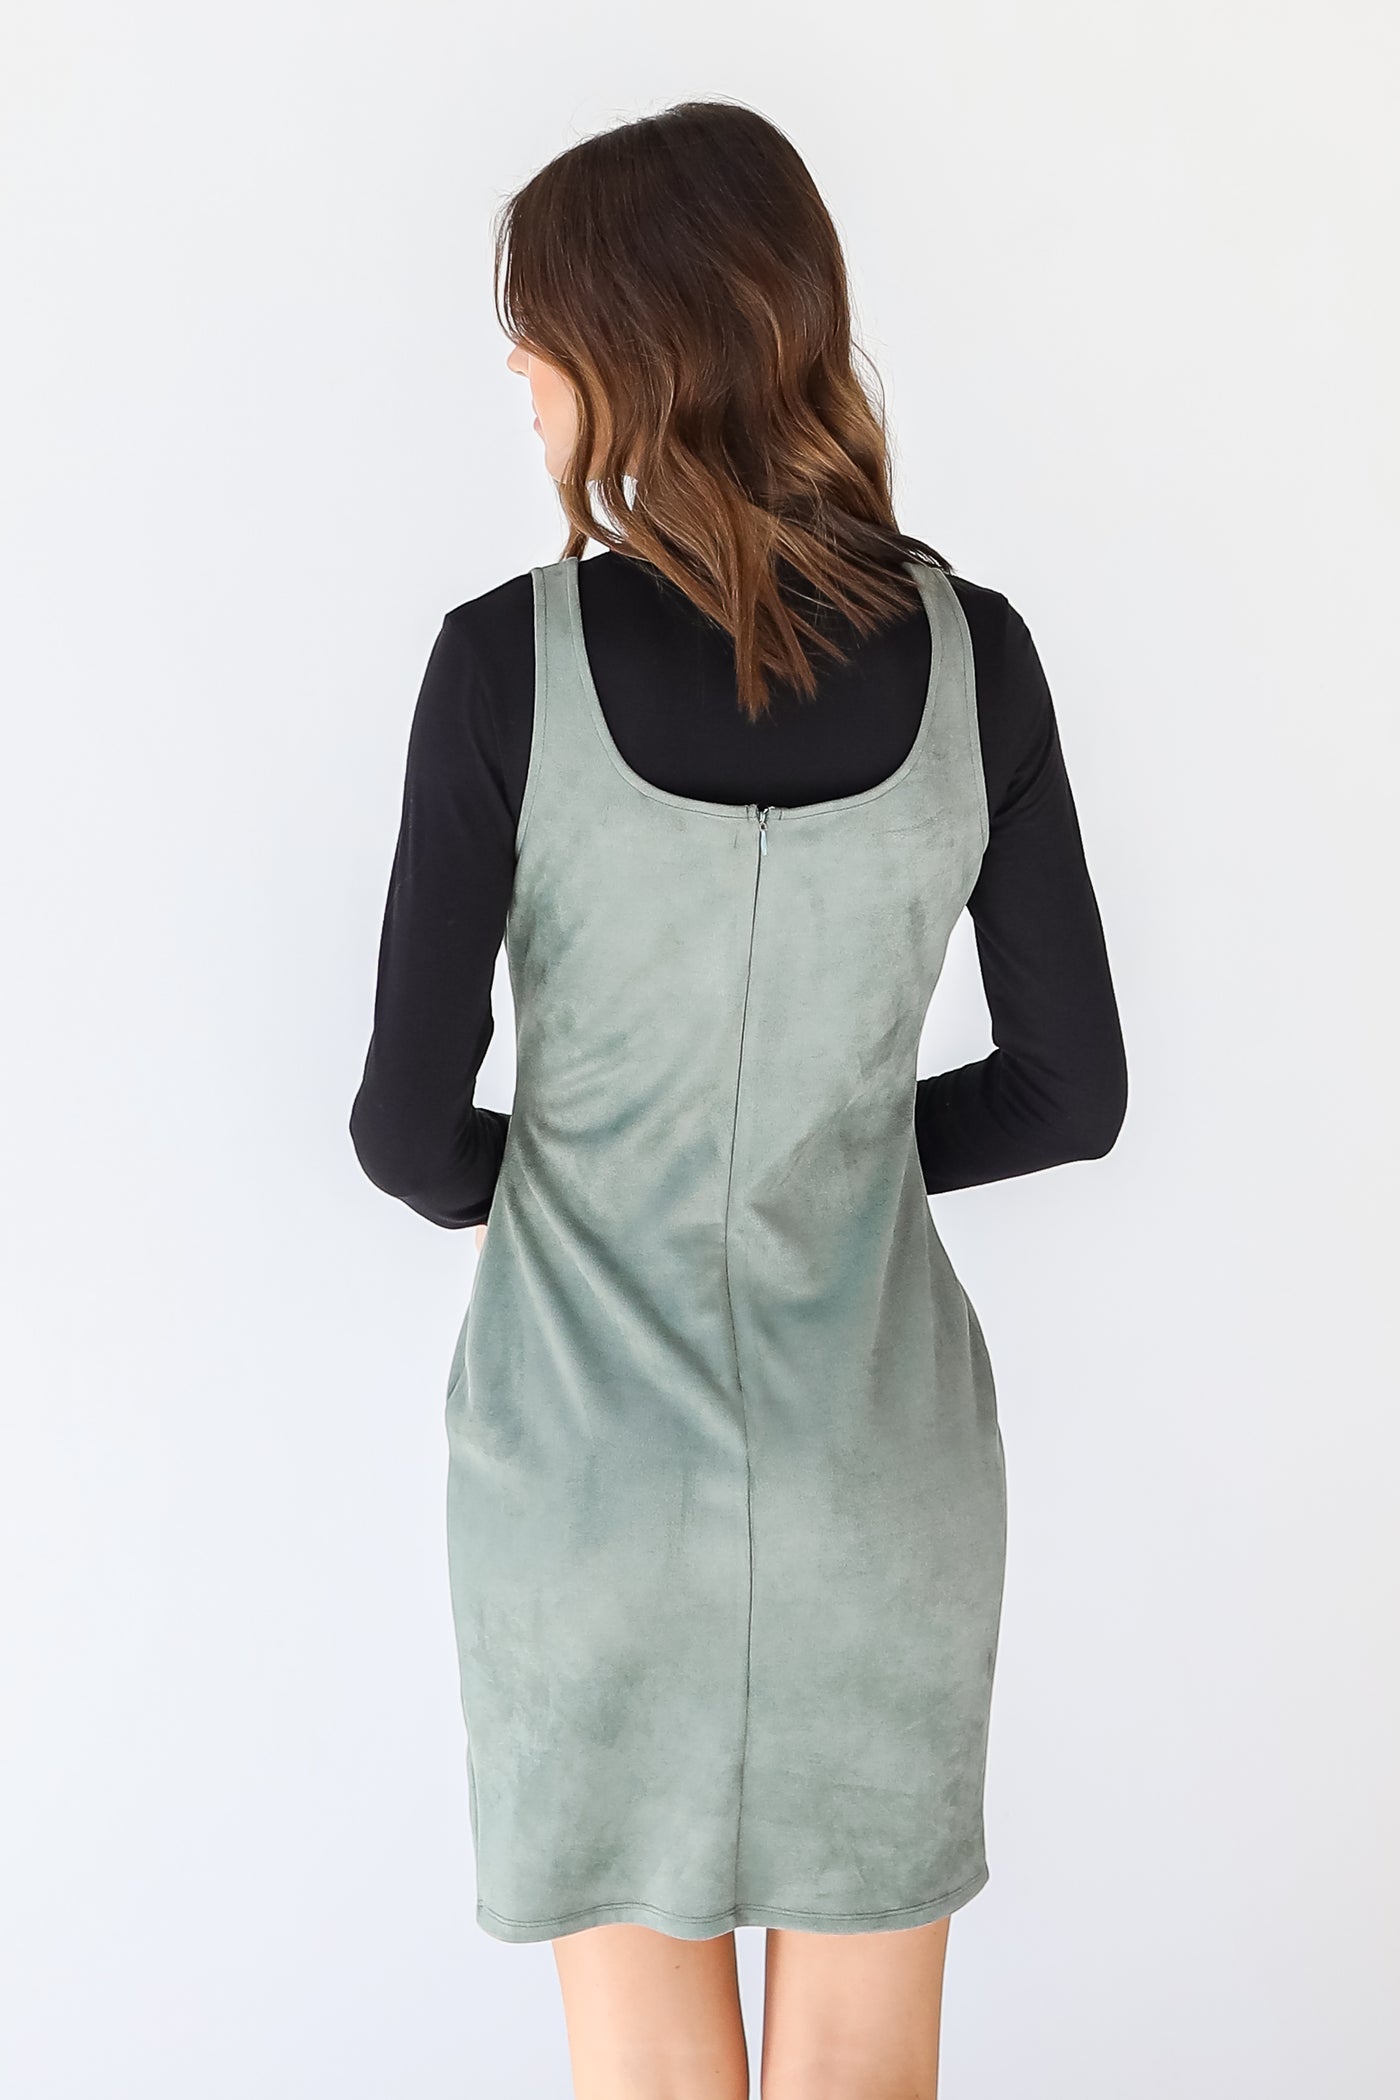 Suede Bodycon Dress in teal back view